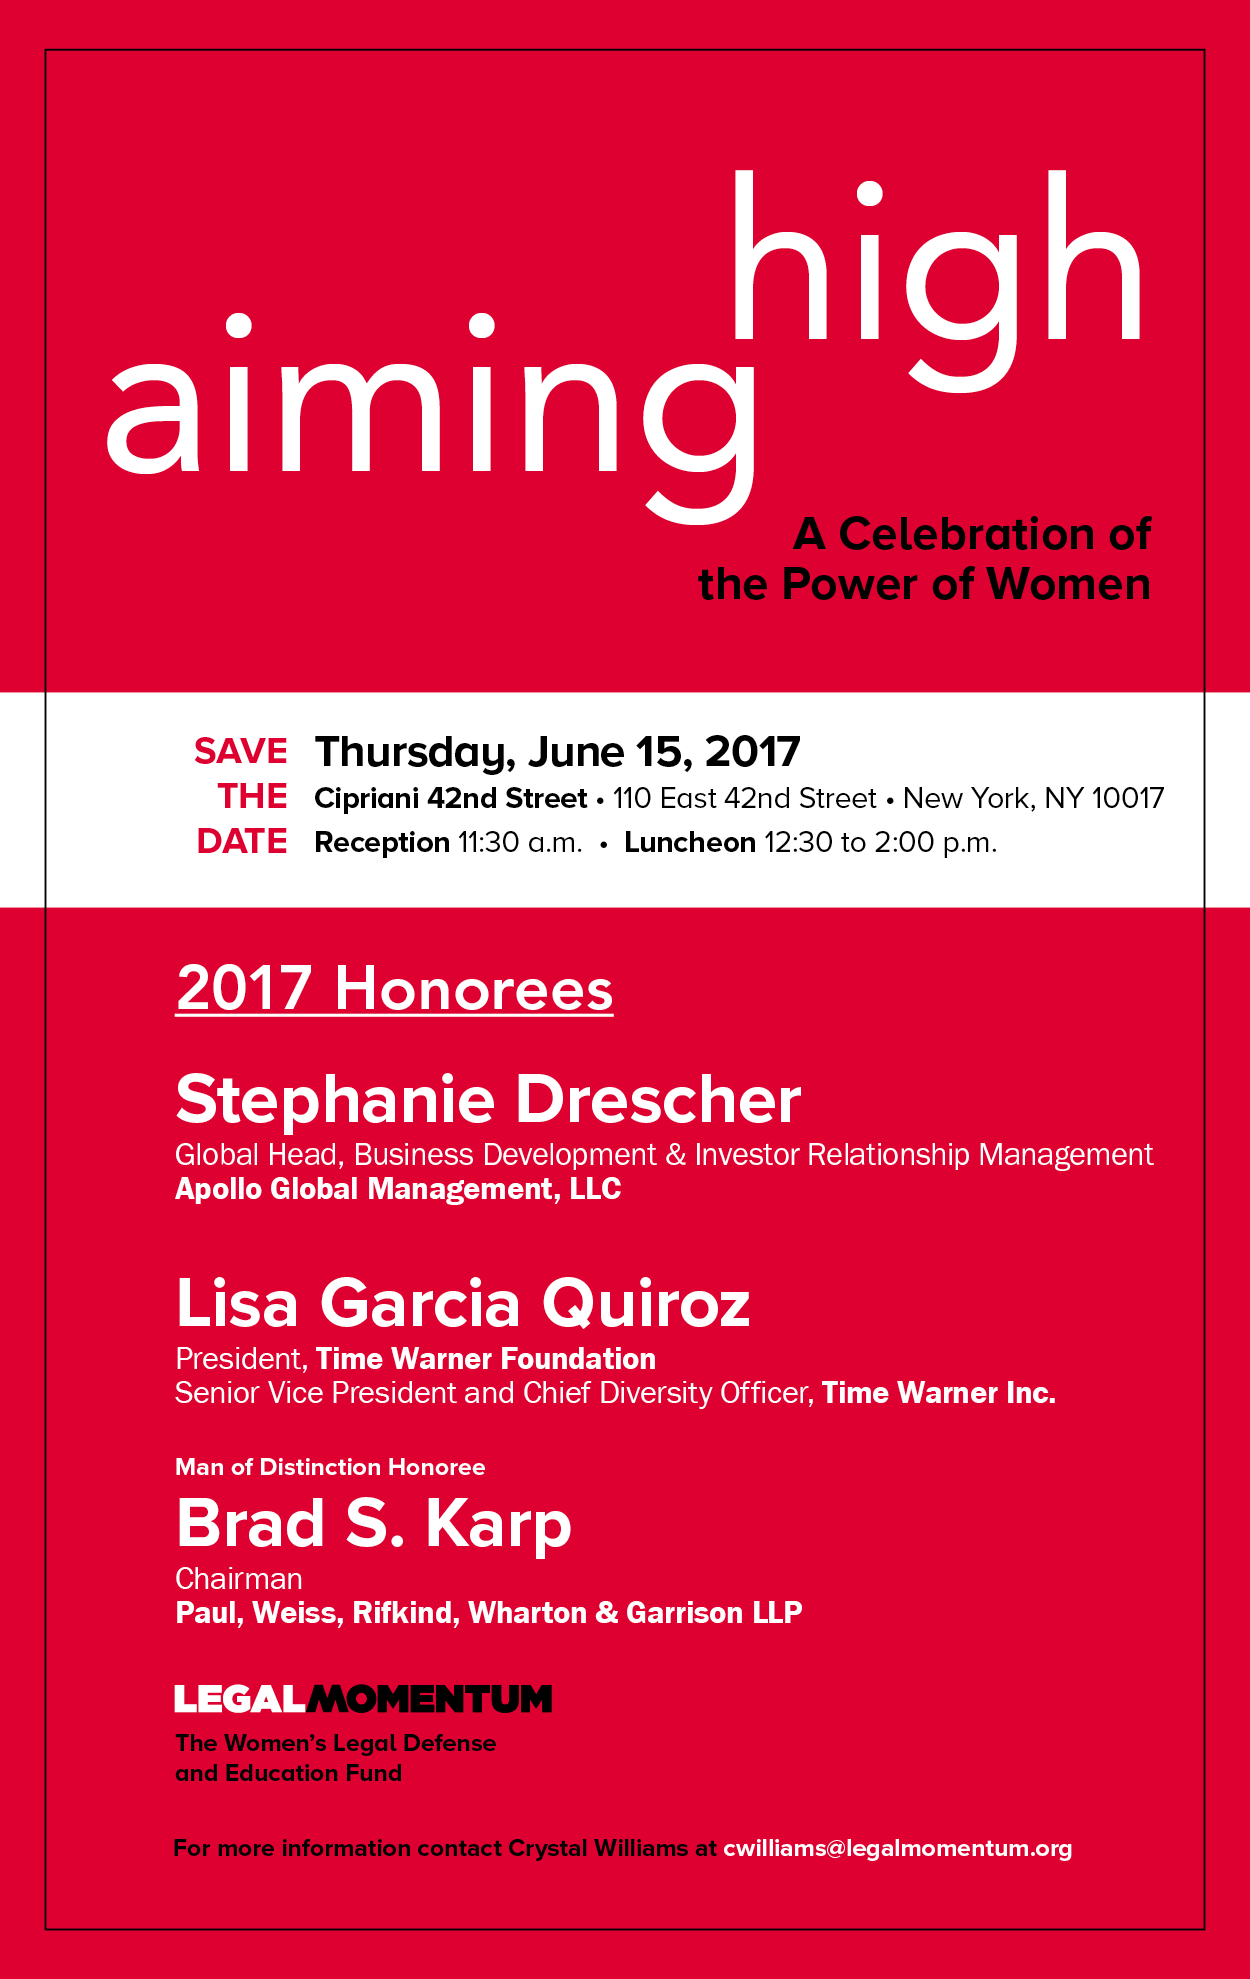 Aiming High 2017 graphic with honorees